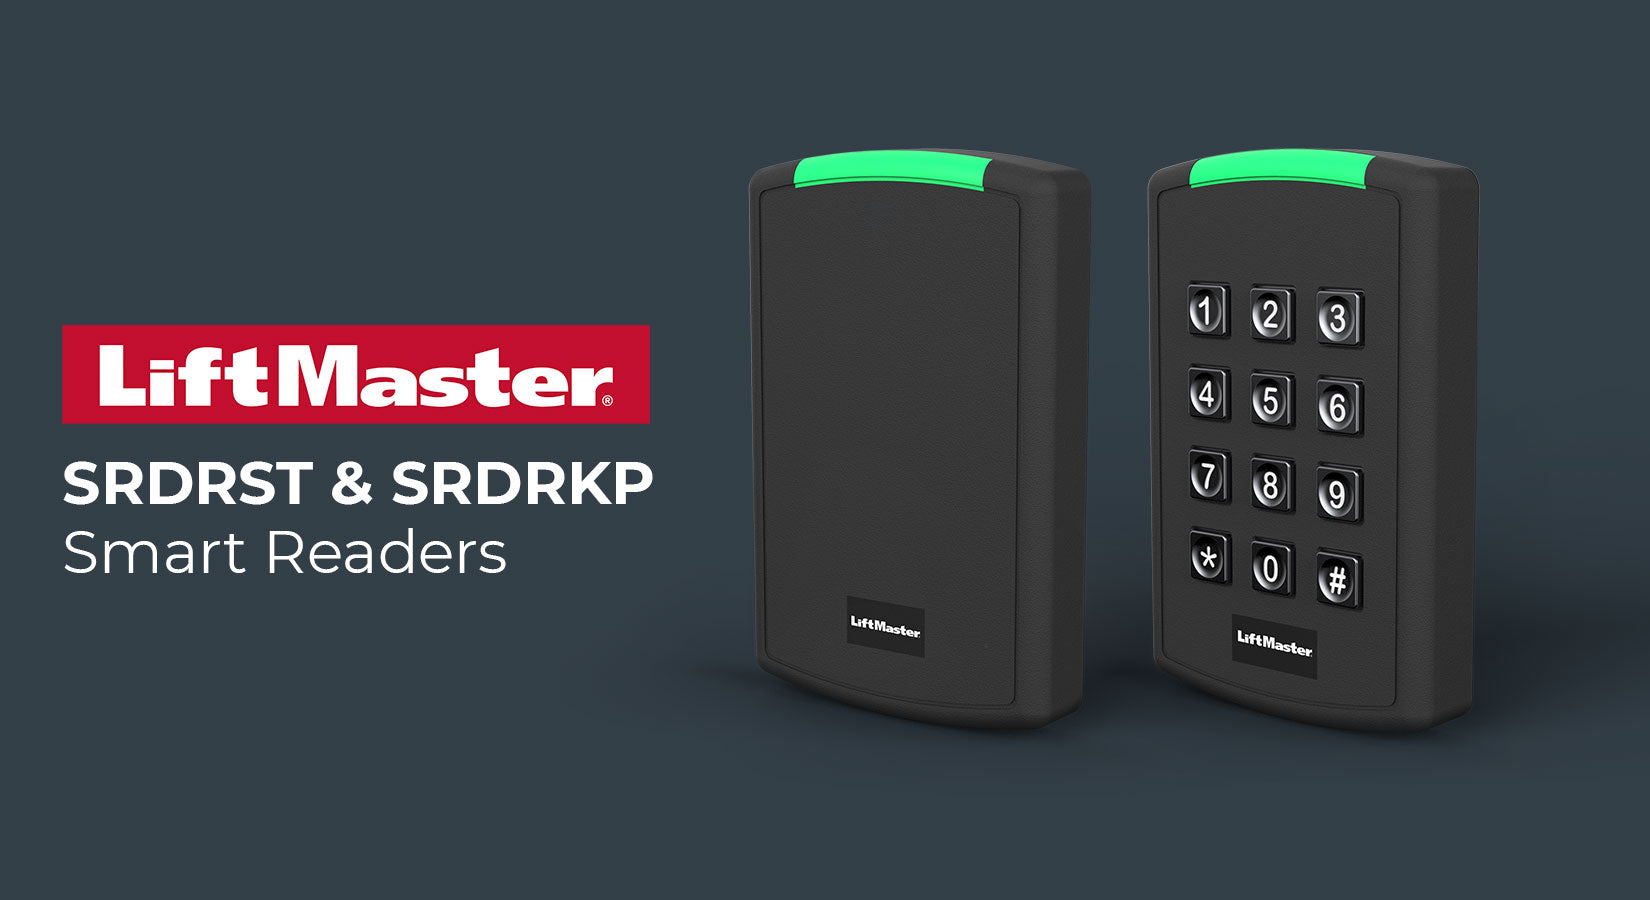 Introducing LiftMaster SRDRST & SRDRKP Smart Readers | All Security Equipment